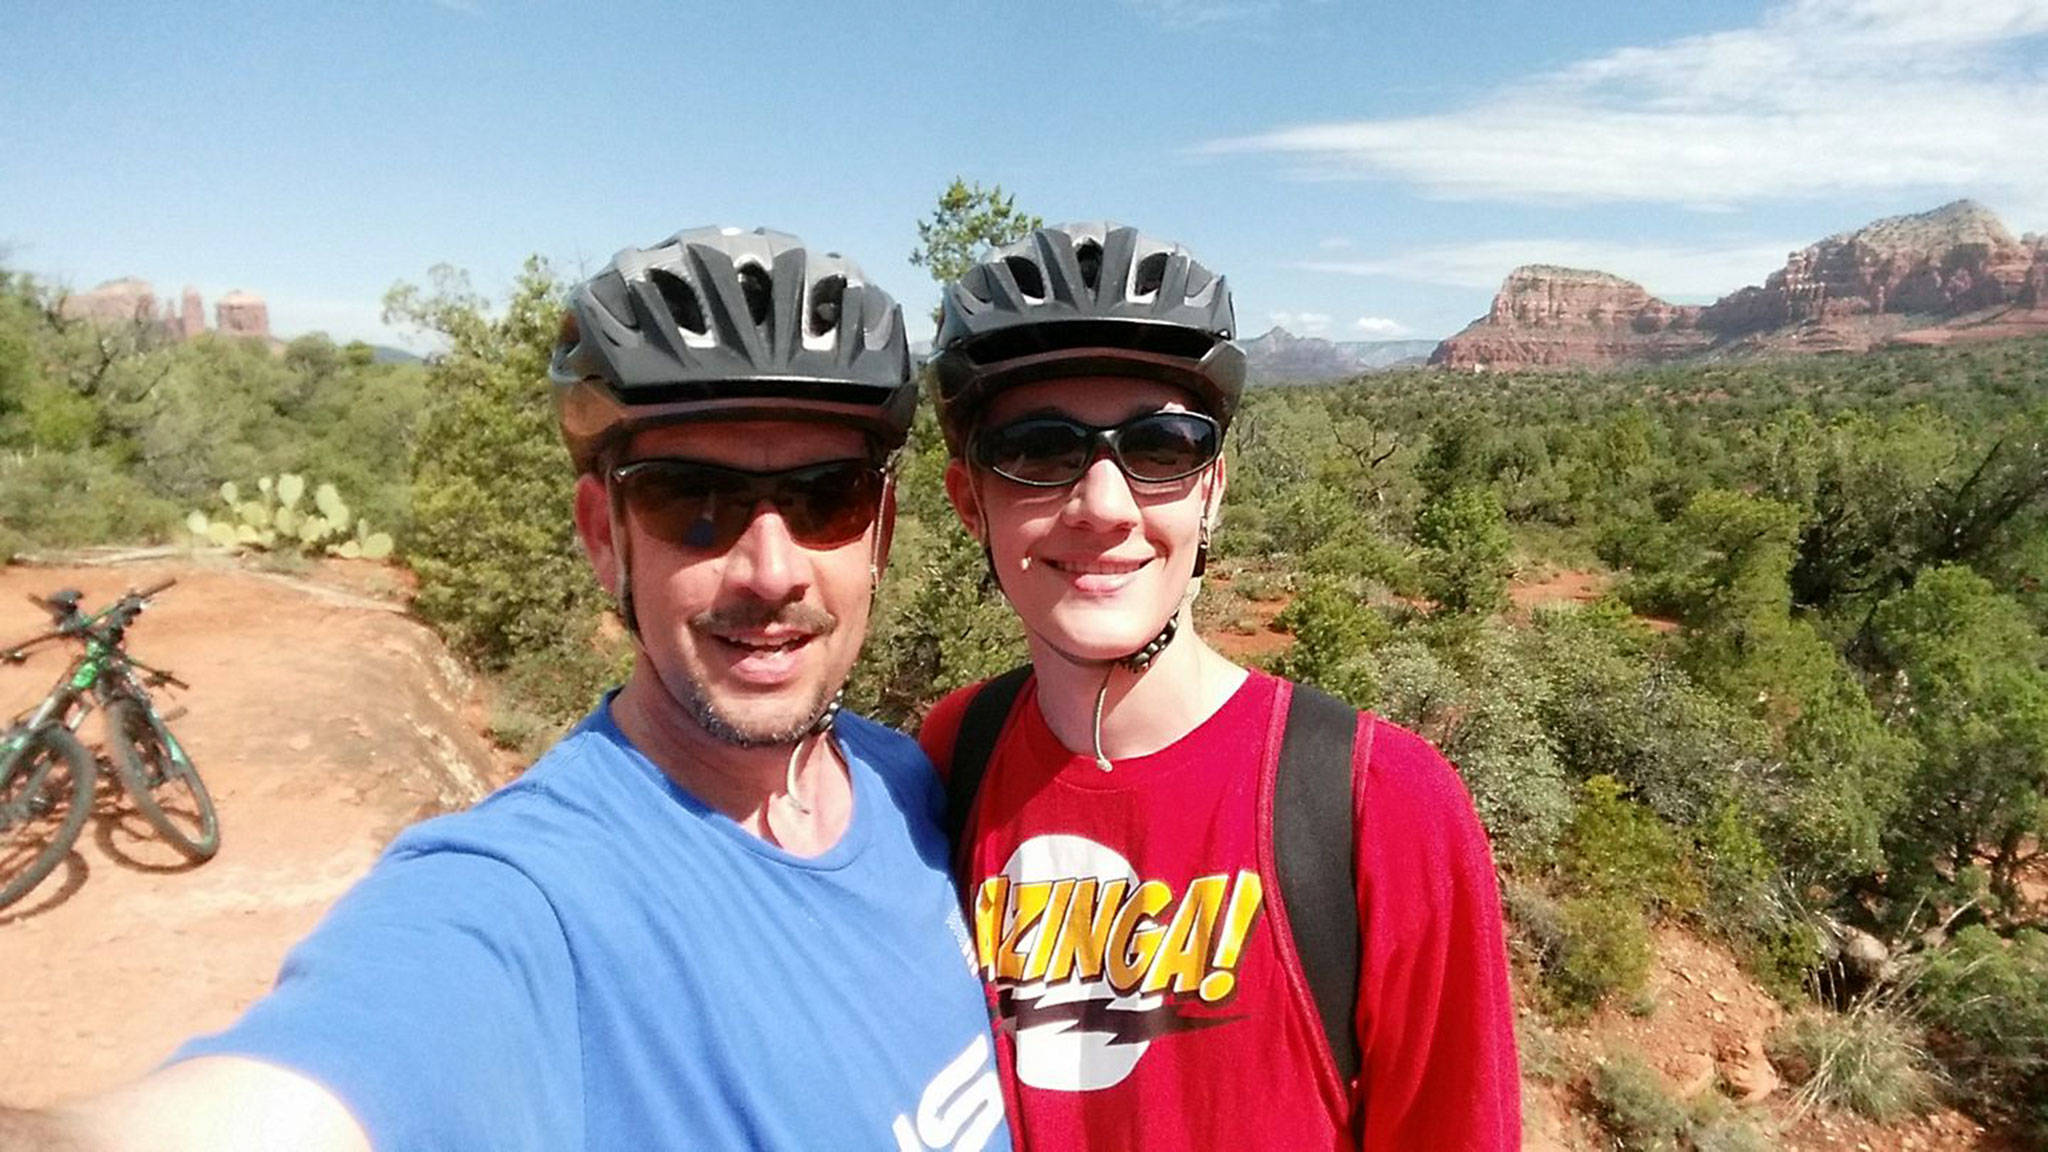 Robert Streett of Sequim takes a photo with his son Robby, 16, near Sedona, Arizona, earlier this week on vacation. The father and son died the next day in a car wreck in Colorado on July 20. They are survived by Josslyn, Robert’s wife, and son, Sawyer, 14, who were also in the vehicle during the crash. The photo was posted on his Facebook page.